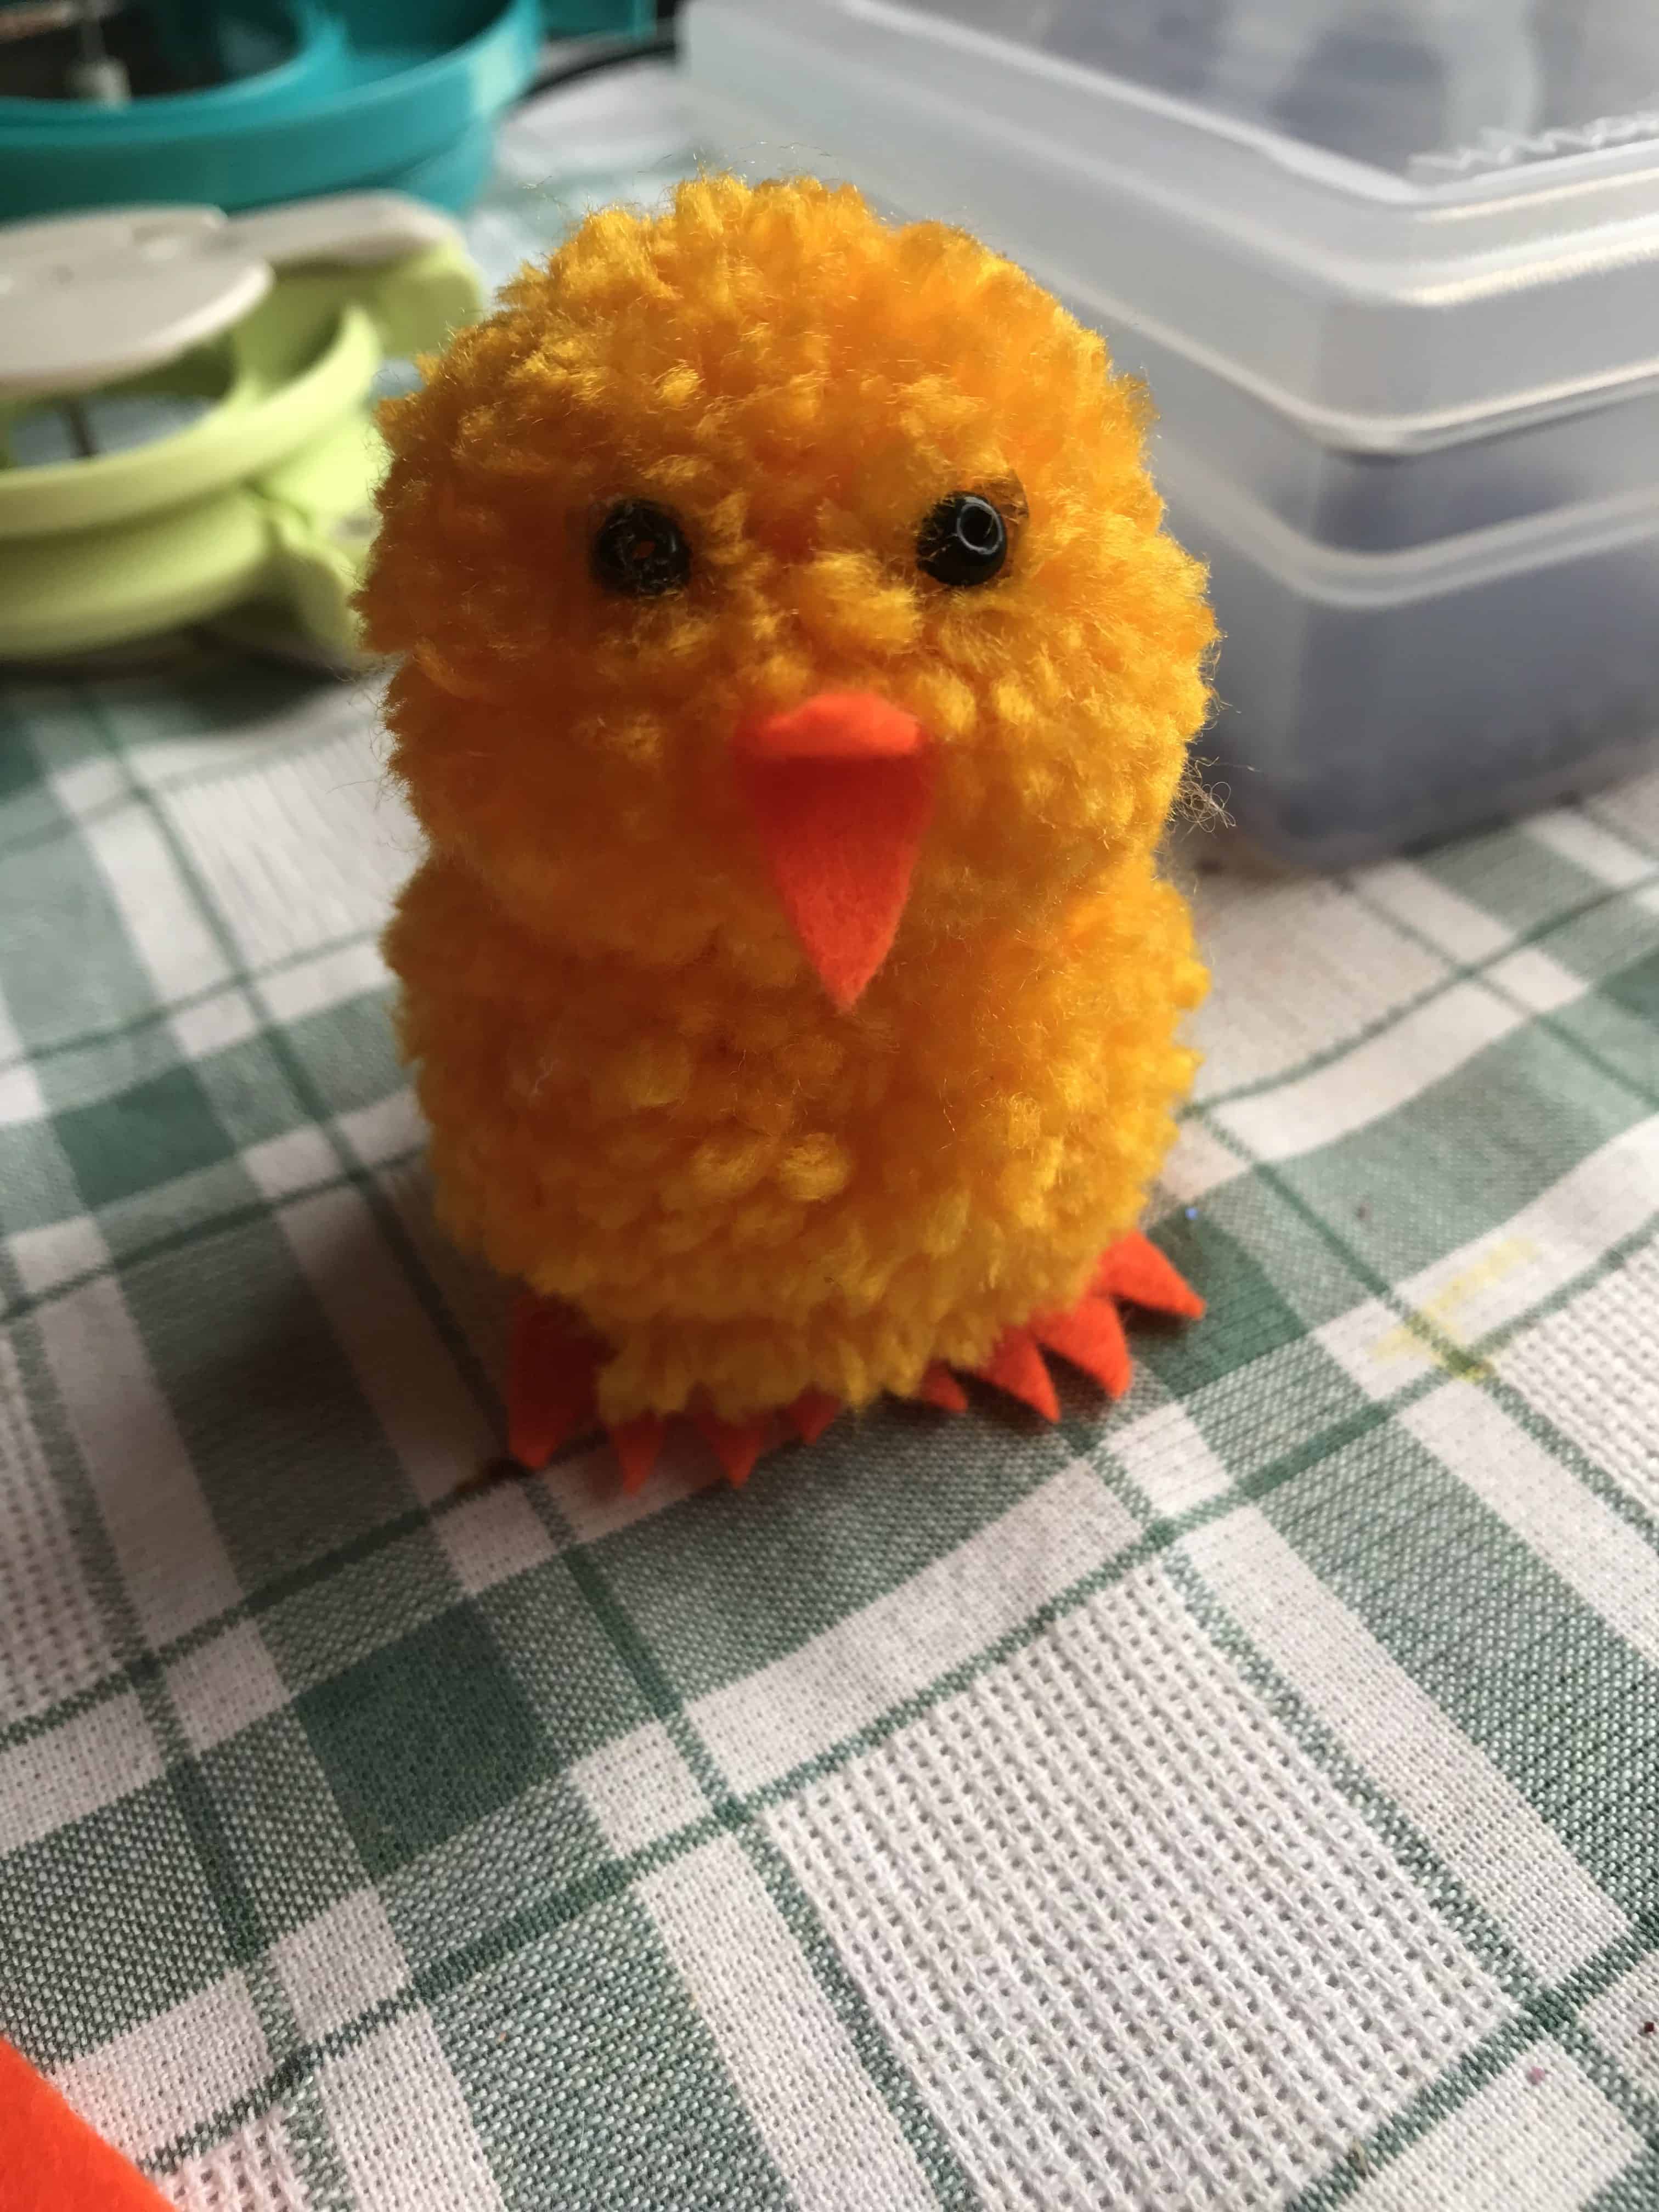 Kids Easter Craft | Quick & Easy Easter Chick You Can Make In Less Than 30 Minutes | Easy Easter Craft | Easter Activities | Pom Pom Craft | Crafts To Make and Sell | Via: https://themummyfront.com #themummyfront.com #easterchick #eastercraft #eastercraftsforkids #easteractivities #easycrafts #craftstosell #easter